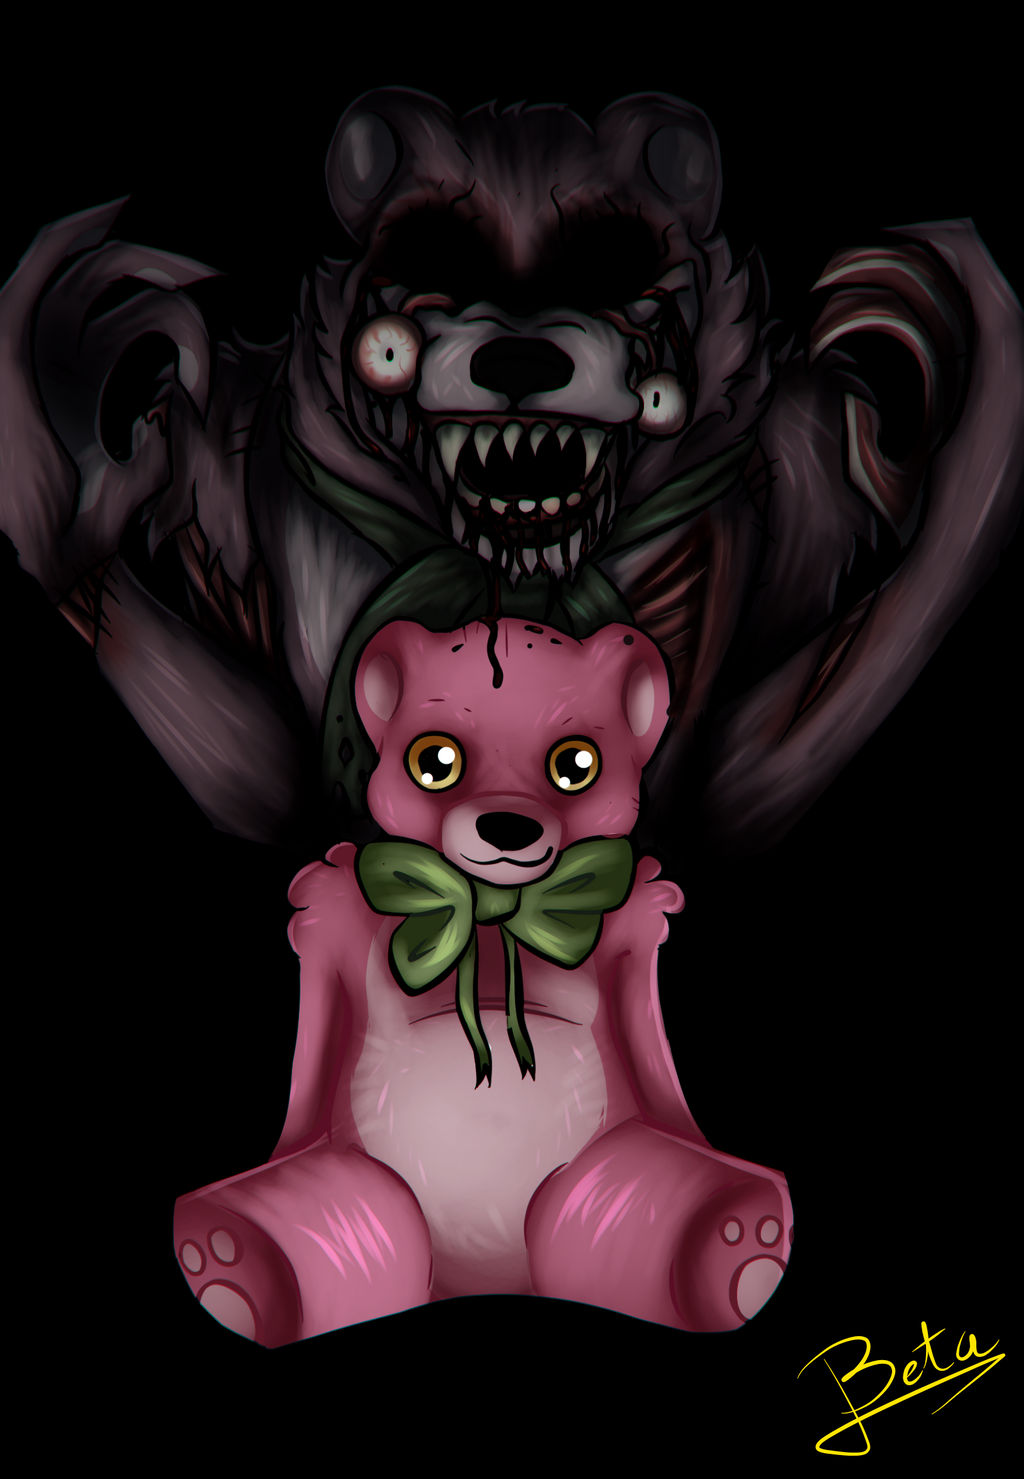 Five Nights at Candy's 3 by TheBetaRoxy on DeviantArt